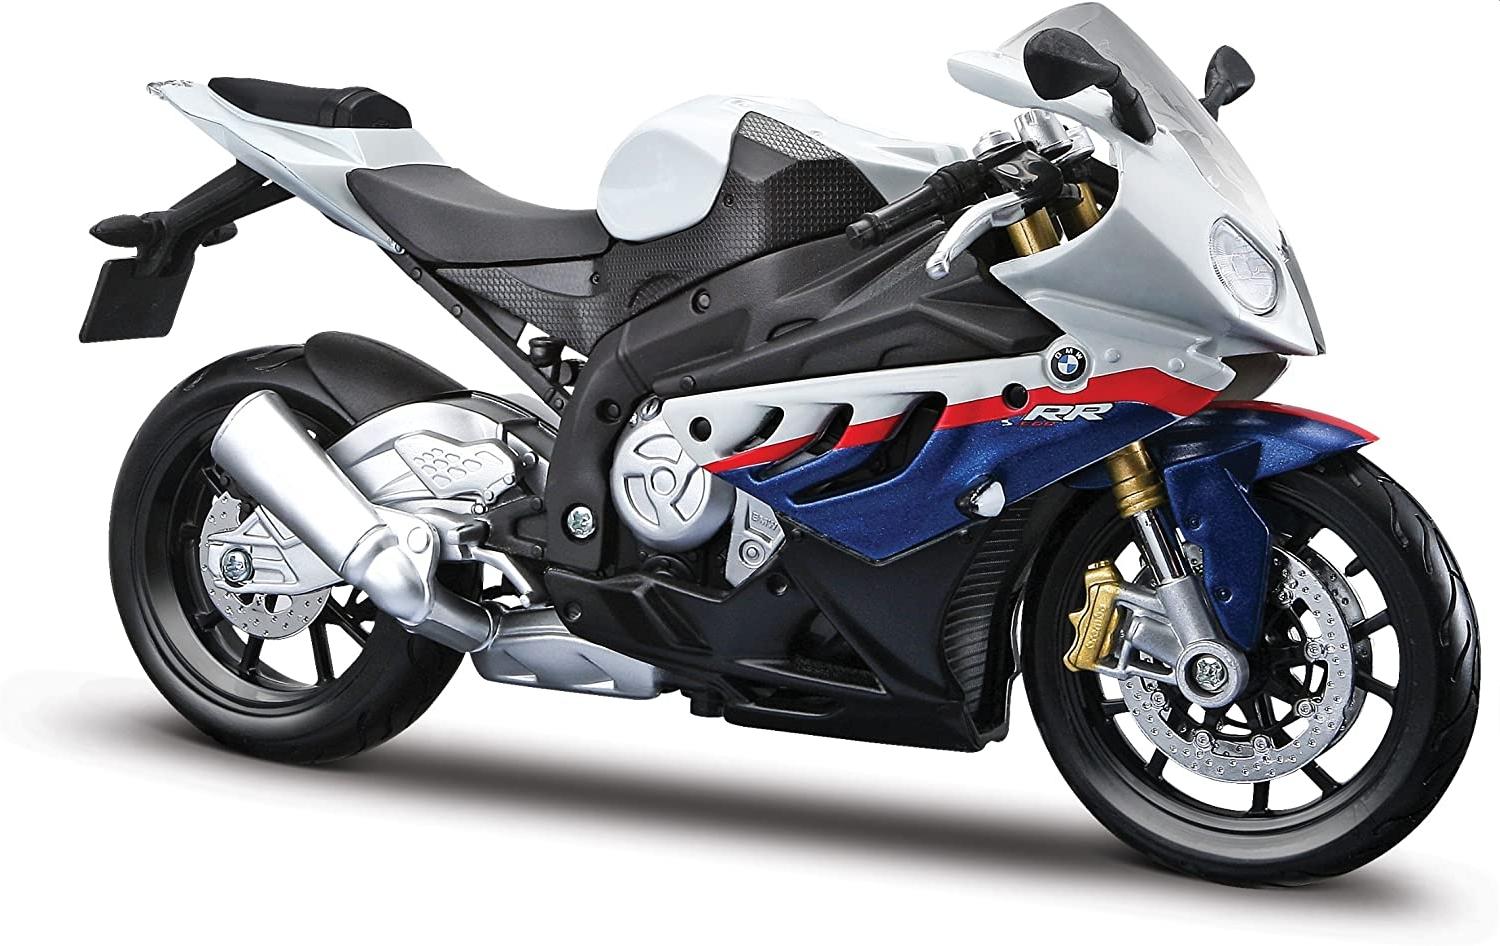 BMW S 1000 RR  white/red/blue 1:12 scale model motorbike from Maisto, 10042